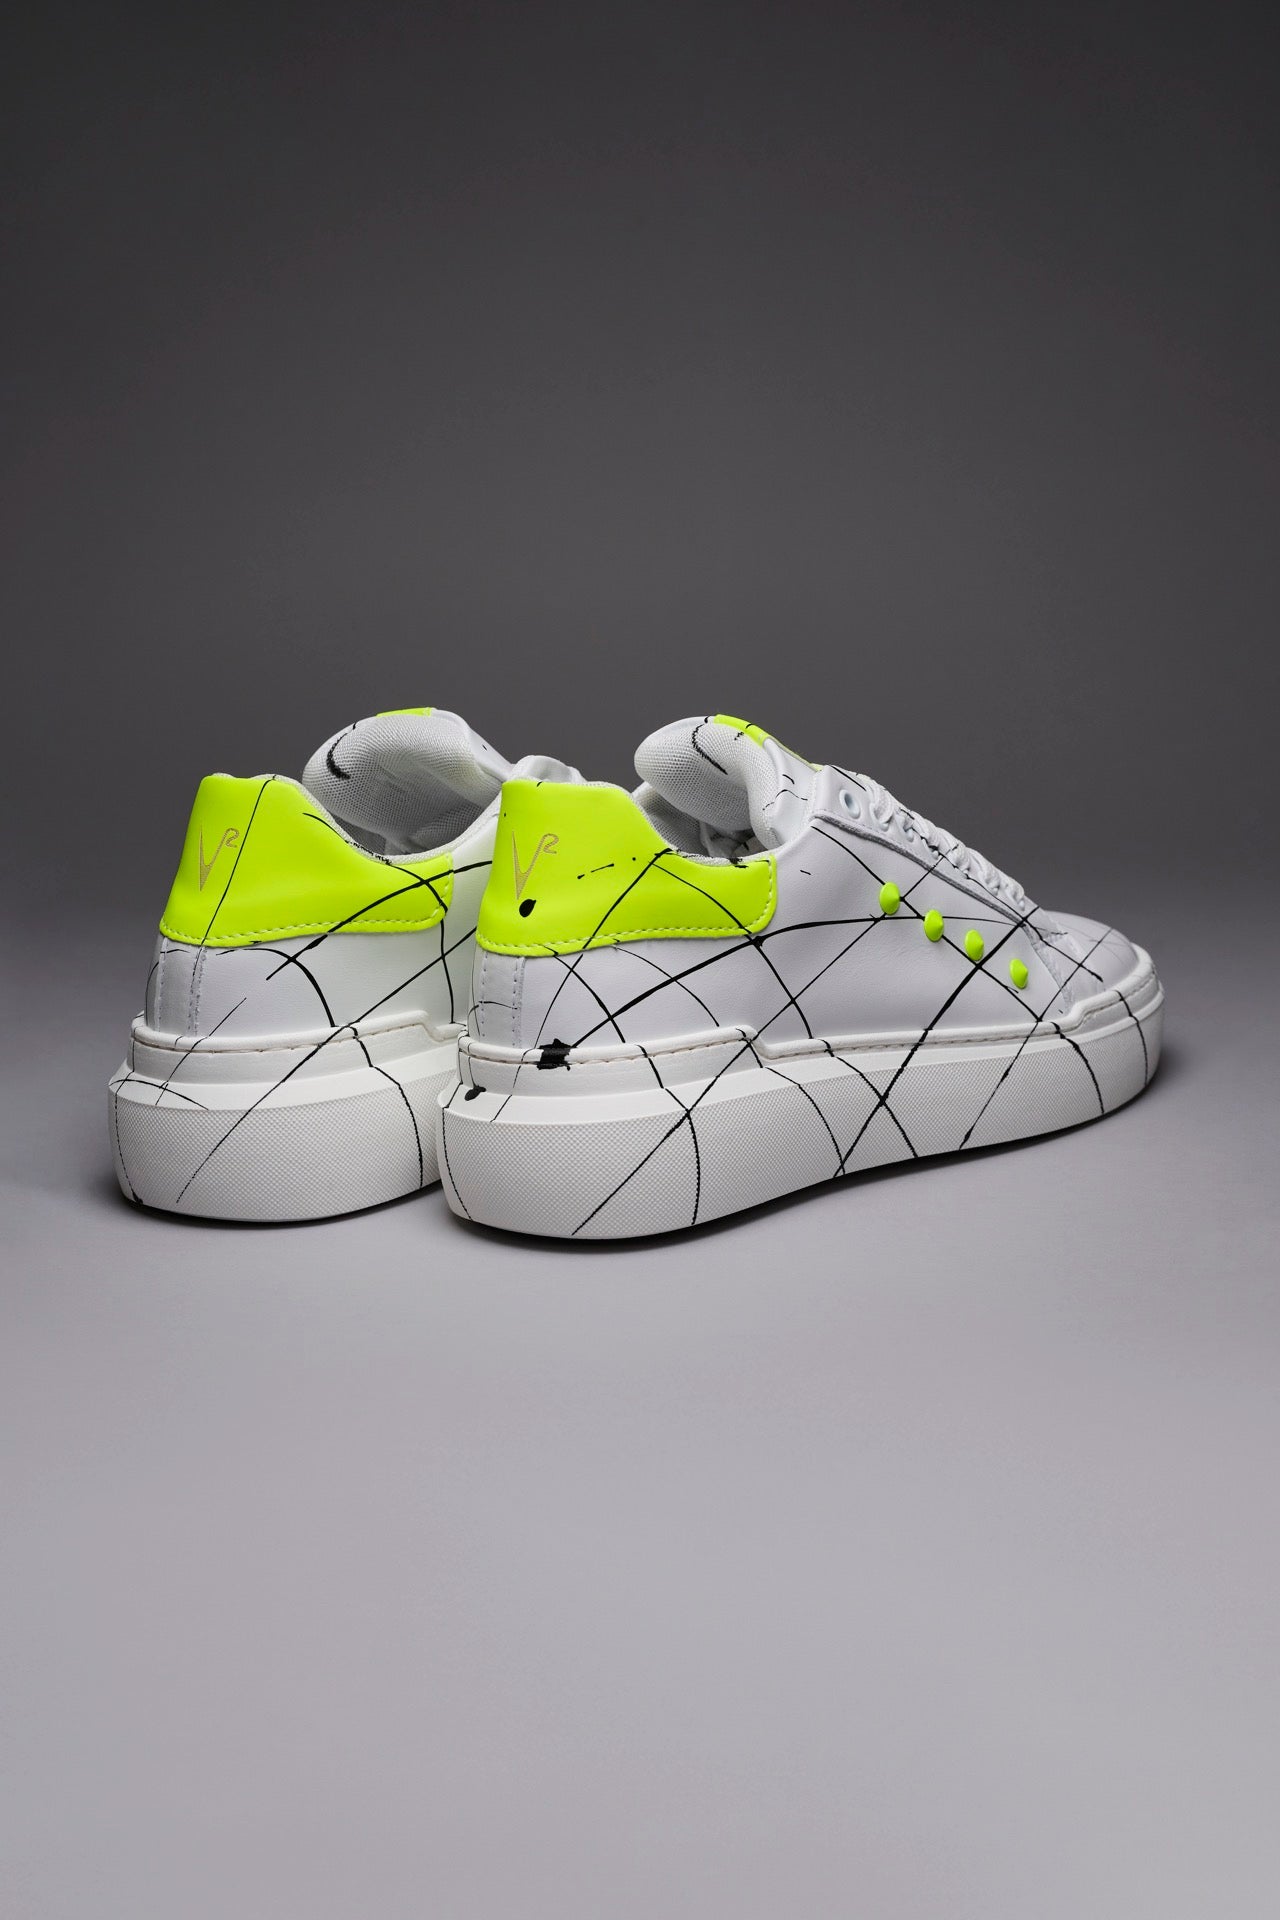 VEGA - Sneakers with high back sole and yellow fluo studs with splashes of paint